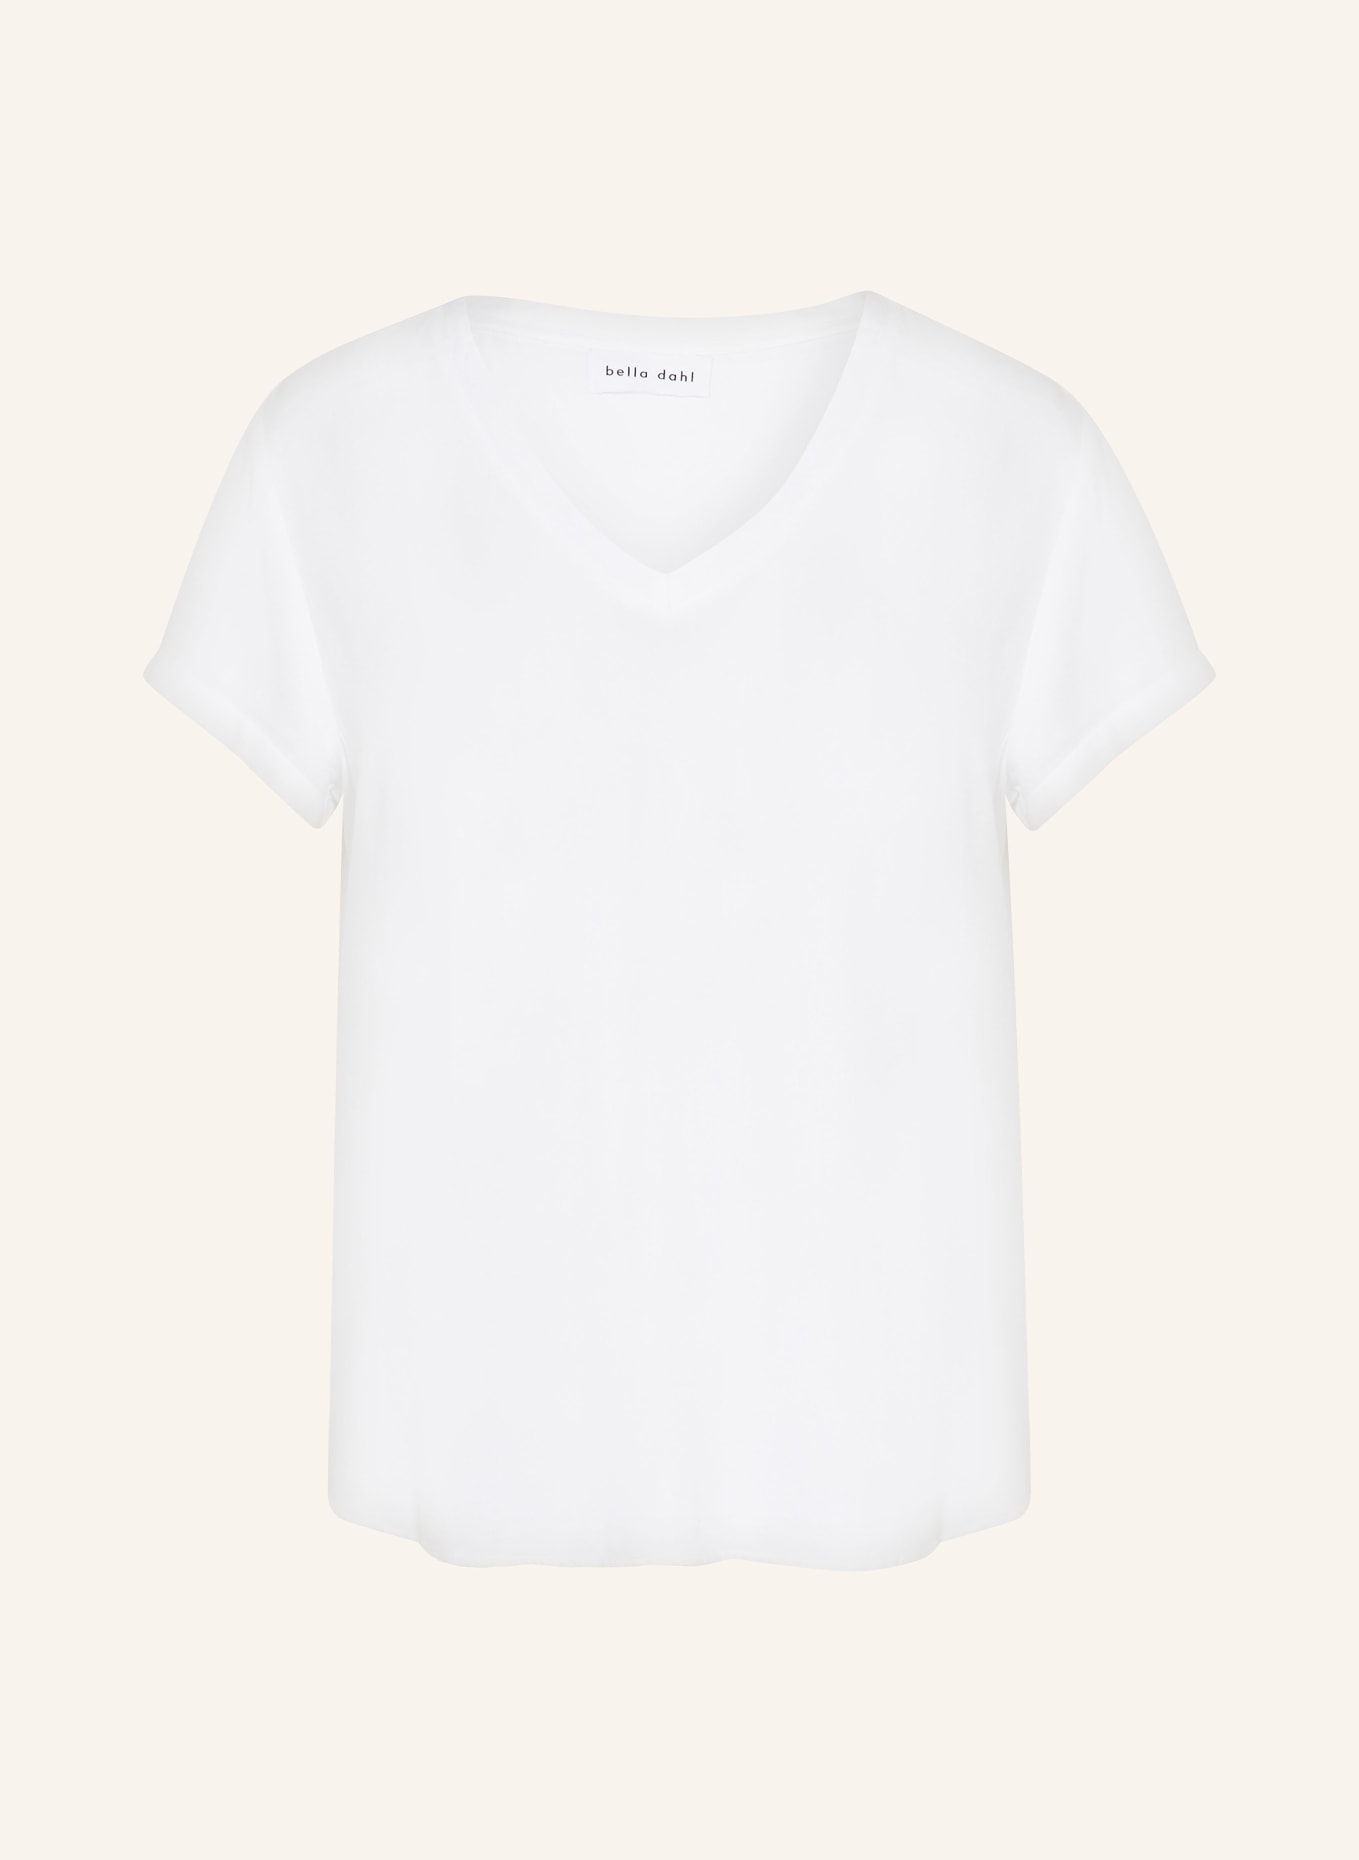 bella dahl T-shirt in mixed materials, Color: WHITE (Image 1)